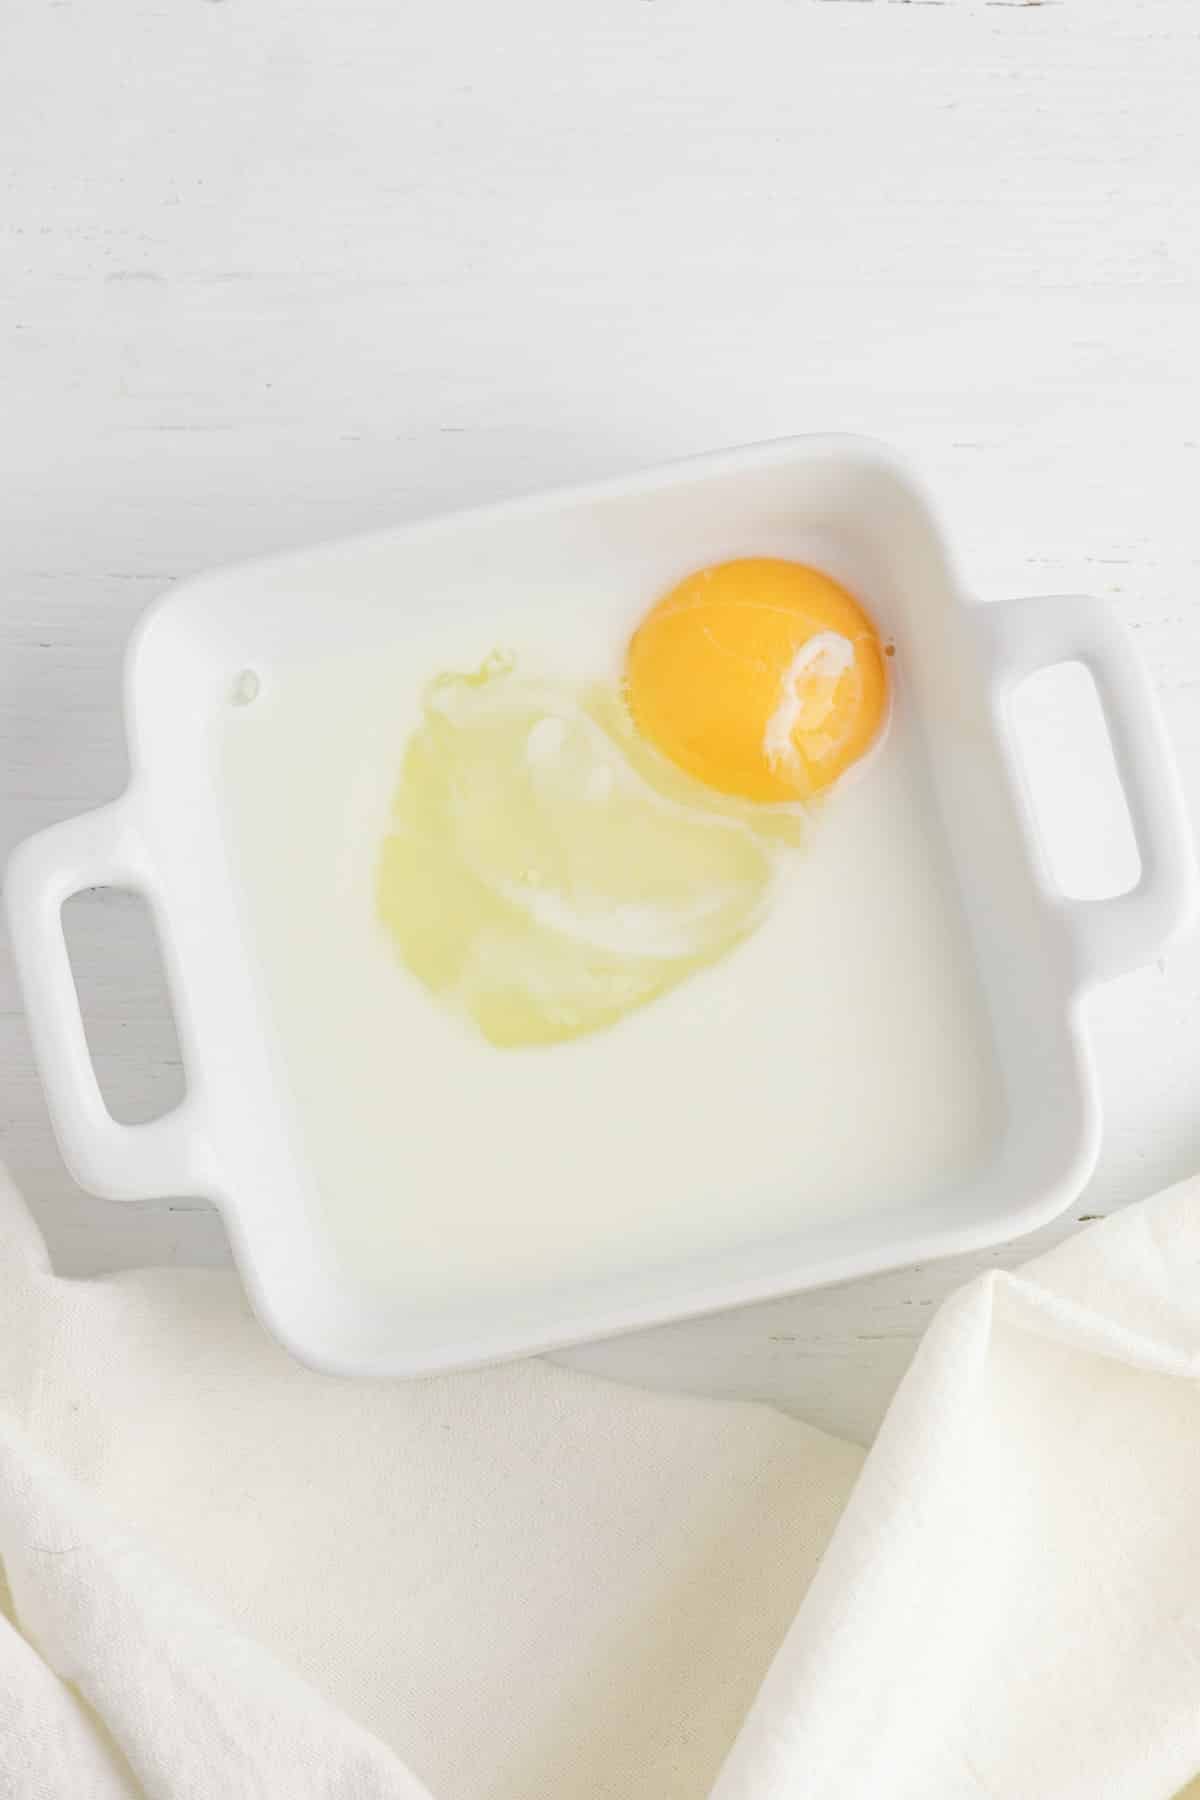 Egg and milk in white glass bowl.